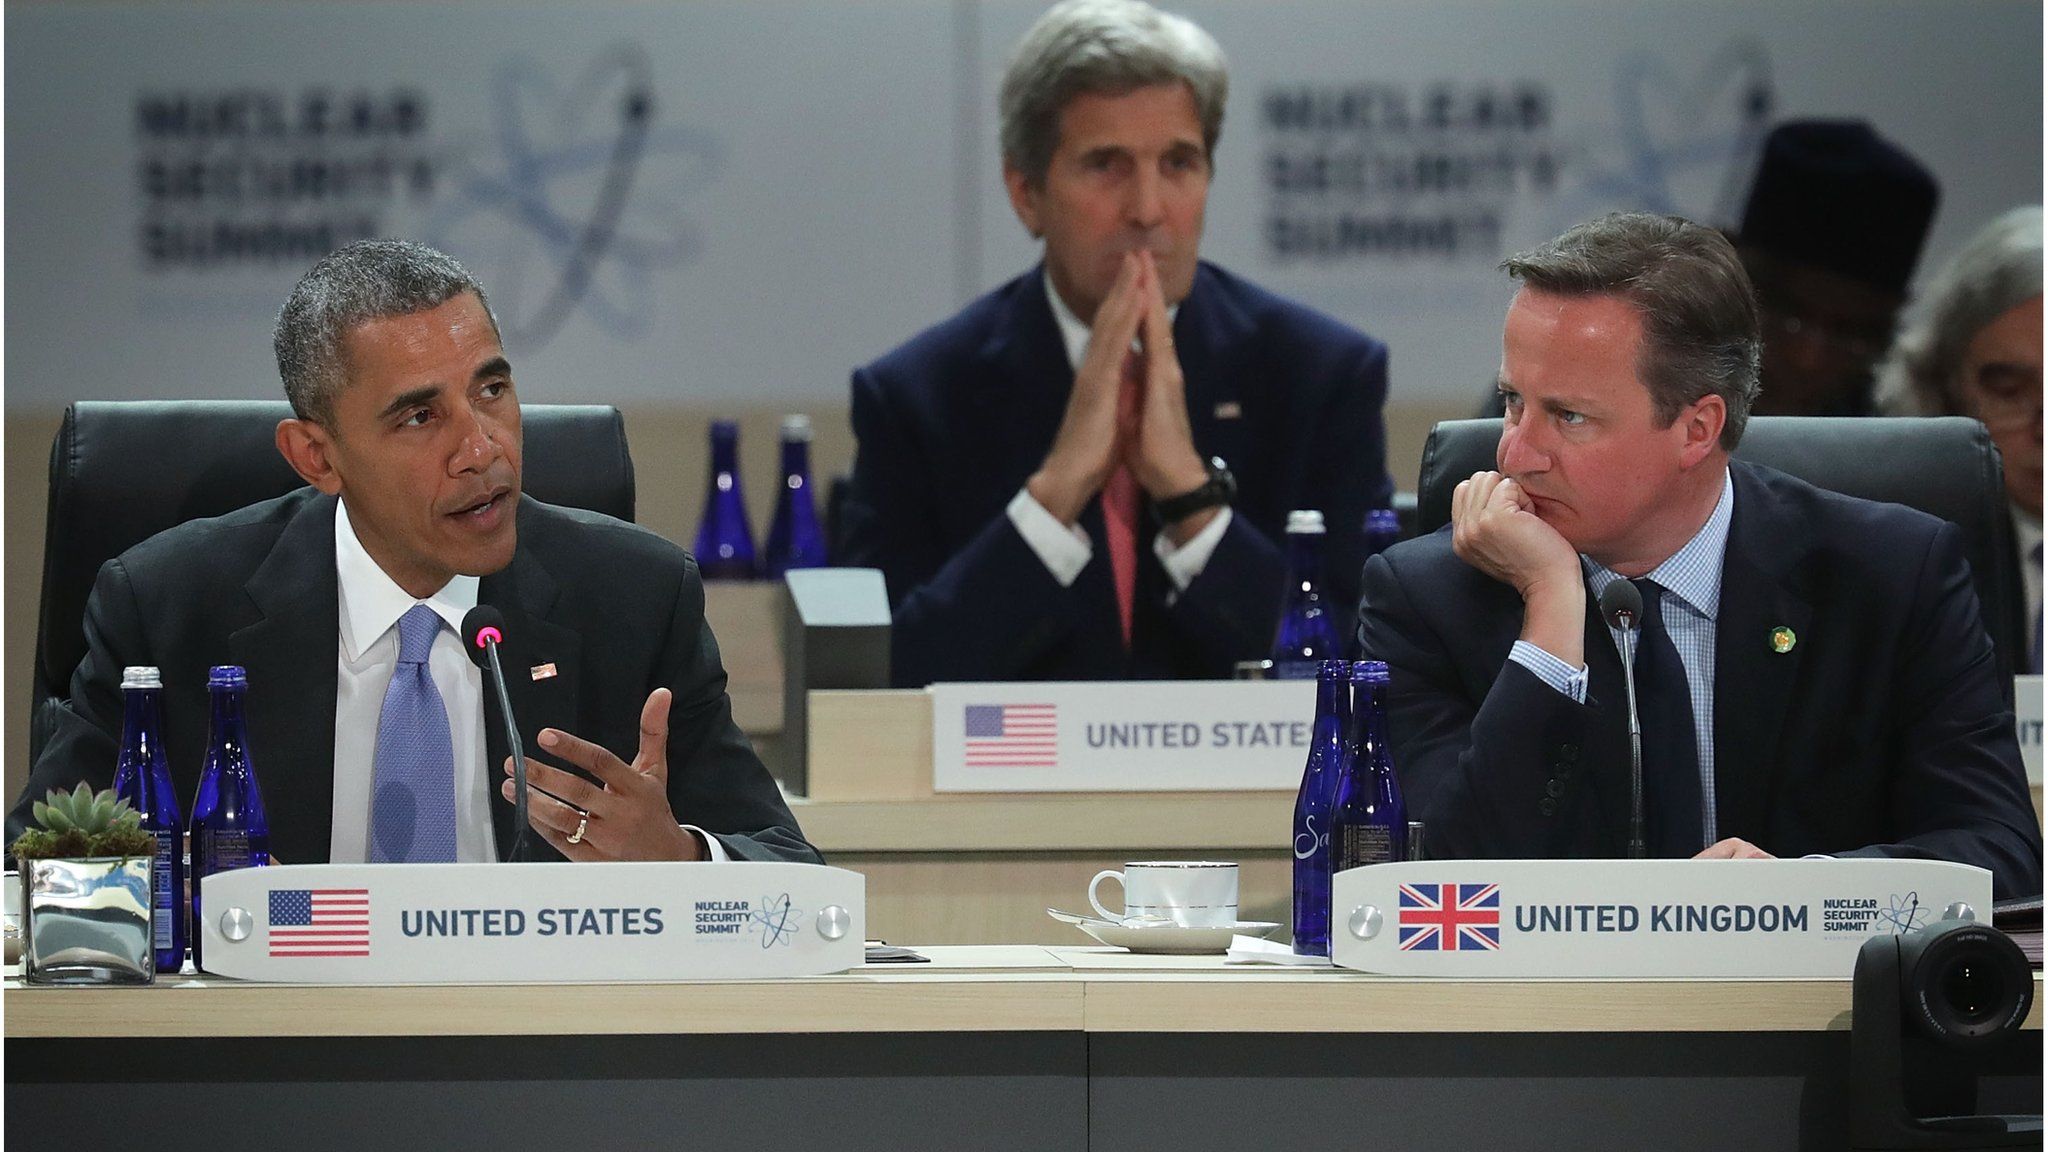 Obama and Cameron at a nuclear security summit